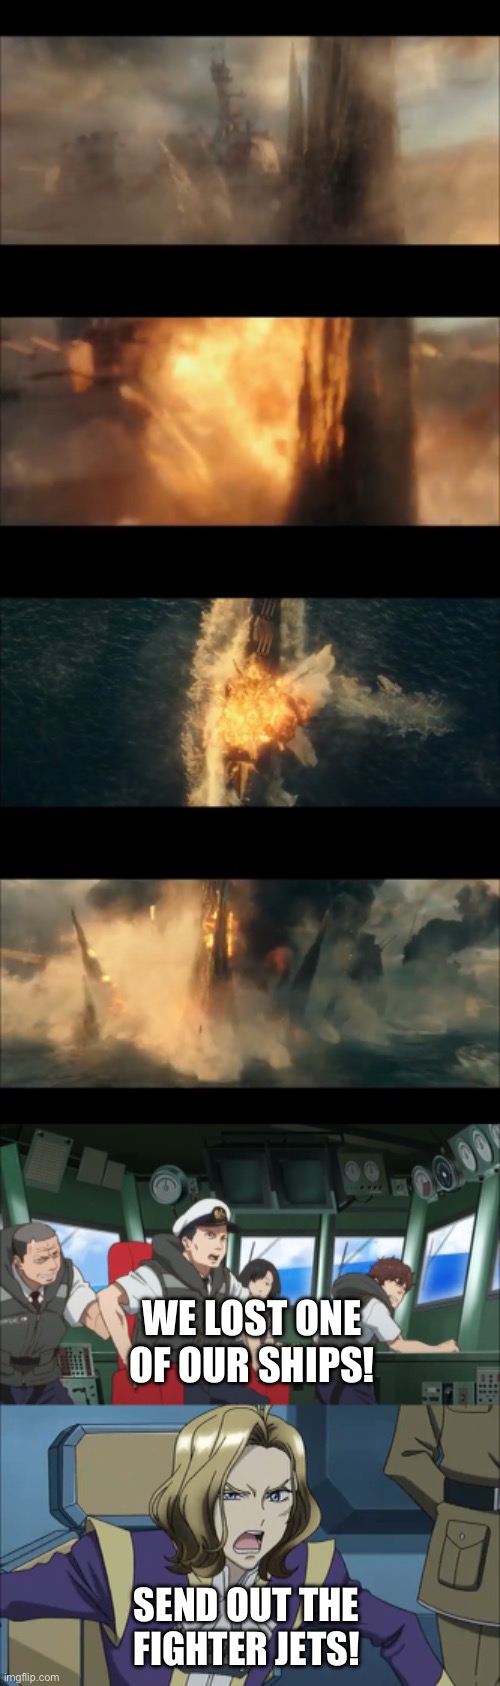 Sea battle part 1 | WE LOST ONE OF OUR SHIPS! SEND OUT THE FIGHTER JETS! | image tagged in anime | made w/ Imgflip meme maker